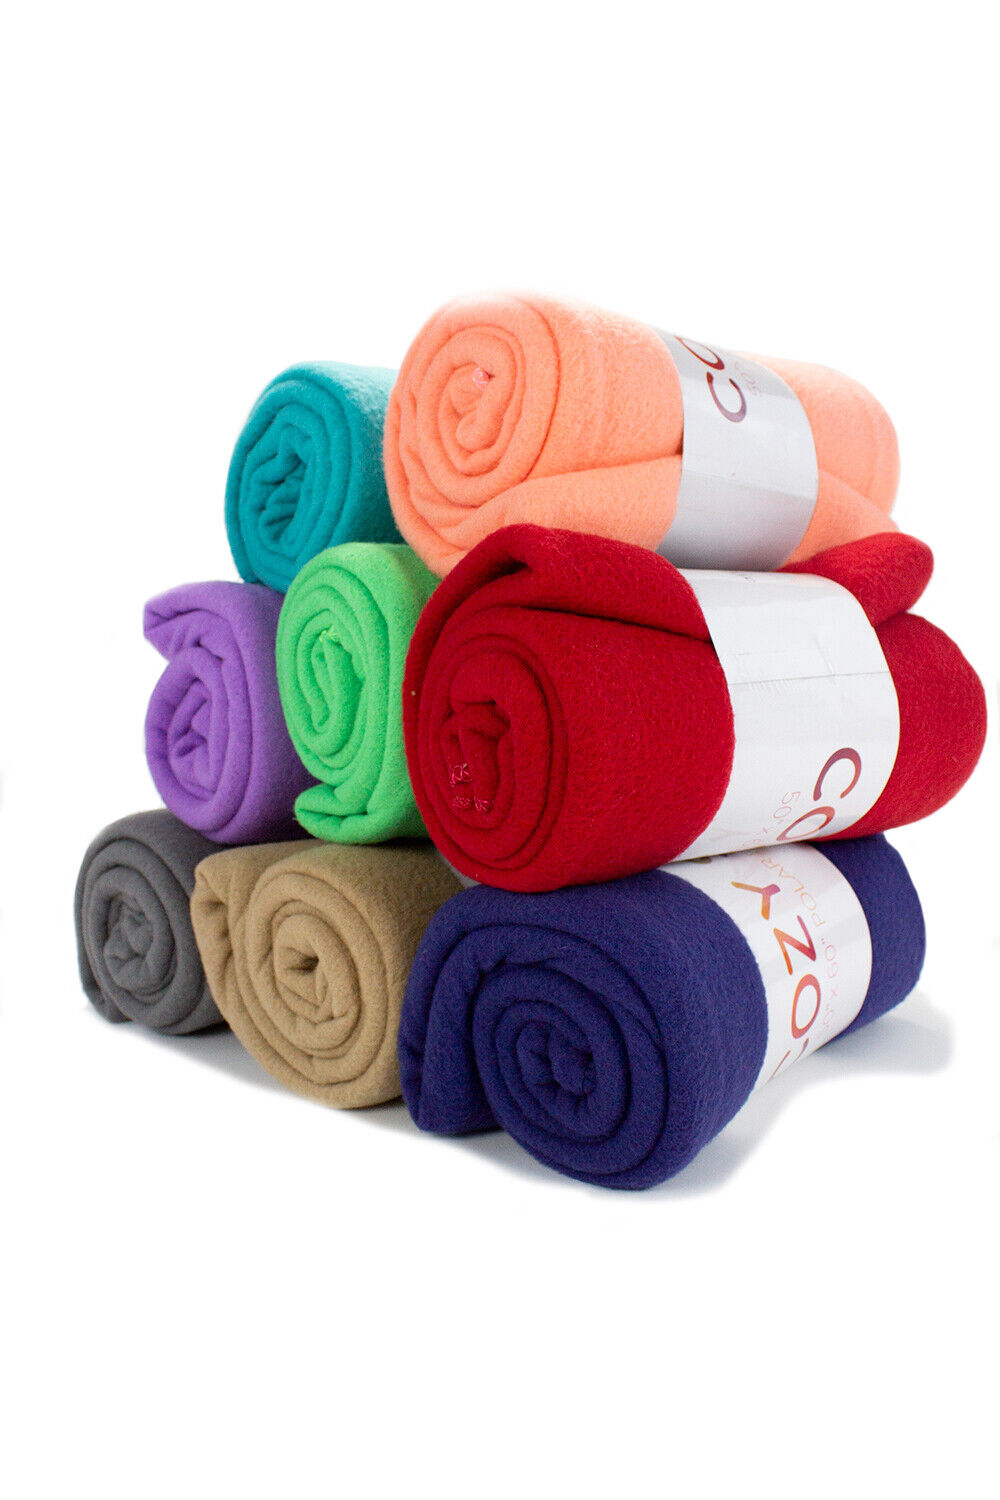 24 Pack of Polar Fleece Throw Blankets - 50 x 60 Assorted Colors Soft & Cozy  Arkwright Does Not Apply - фотография #2